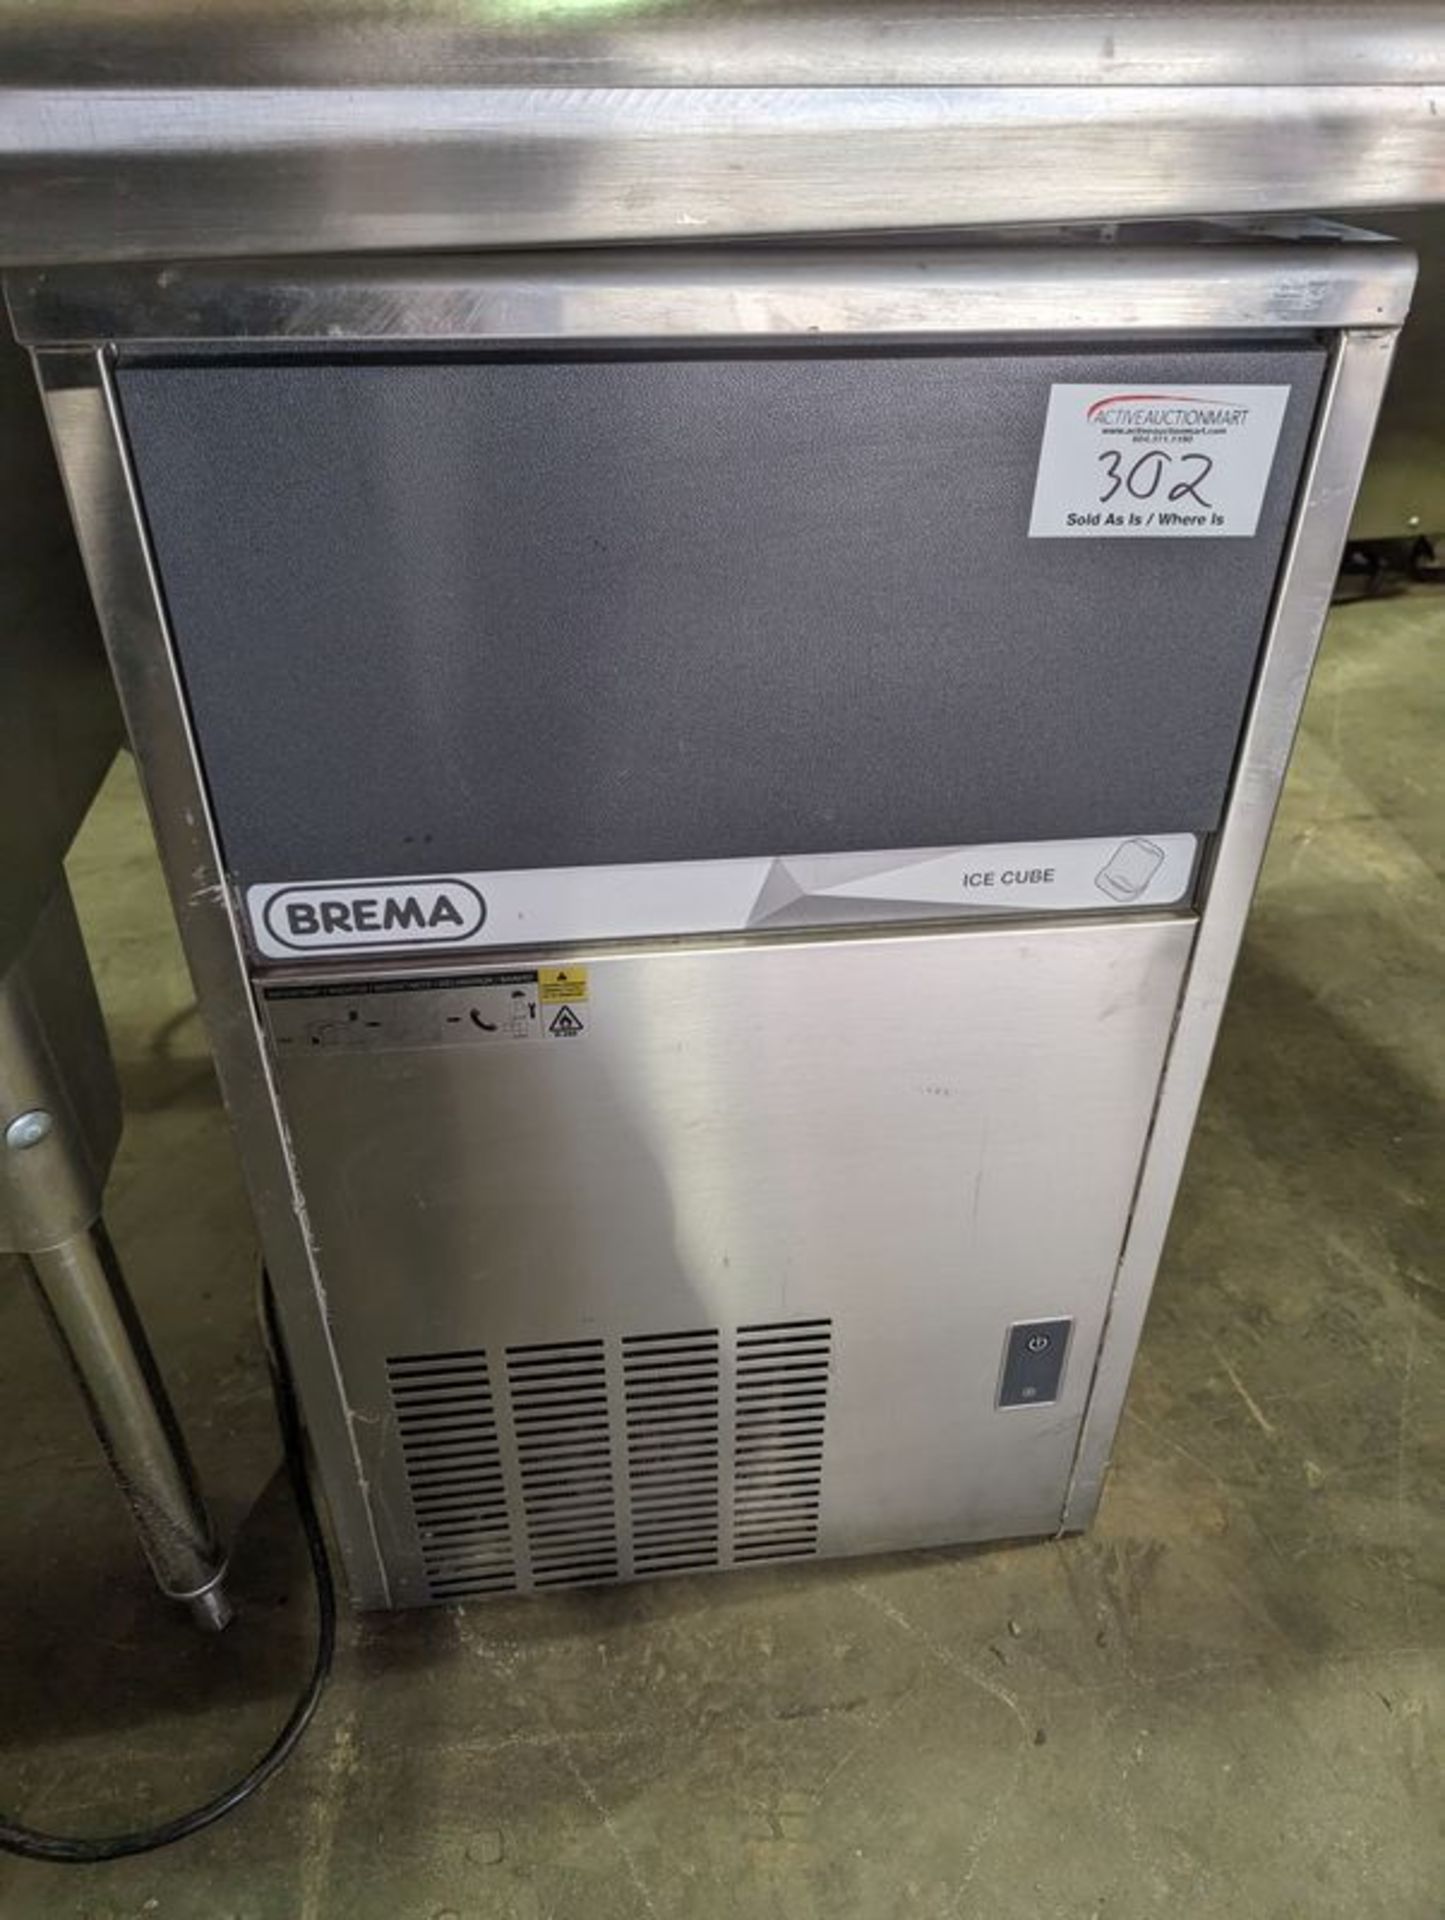 Brema Under Counter Ice Machine - Purchased New, Used 1 Year, New Cost $2350.00